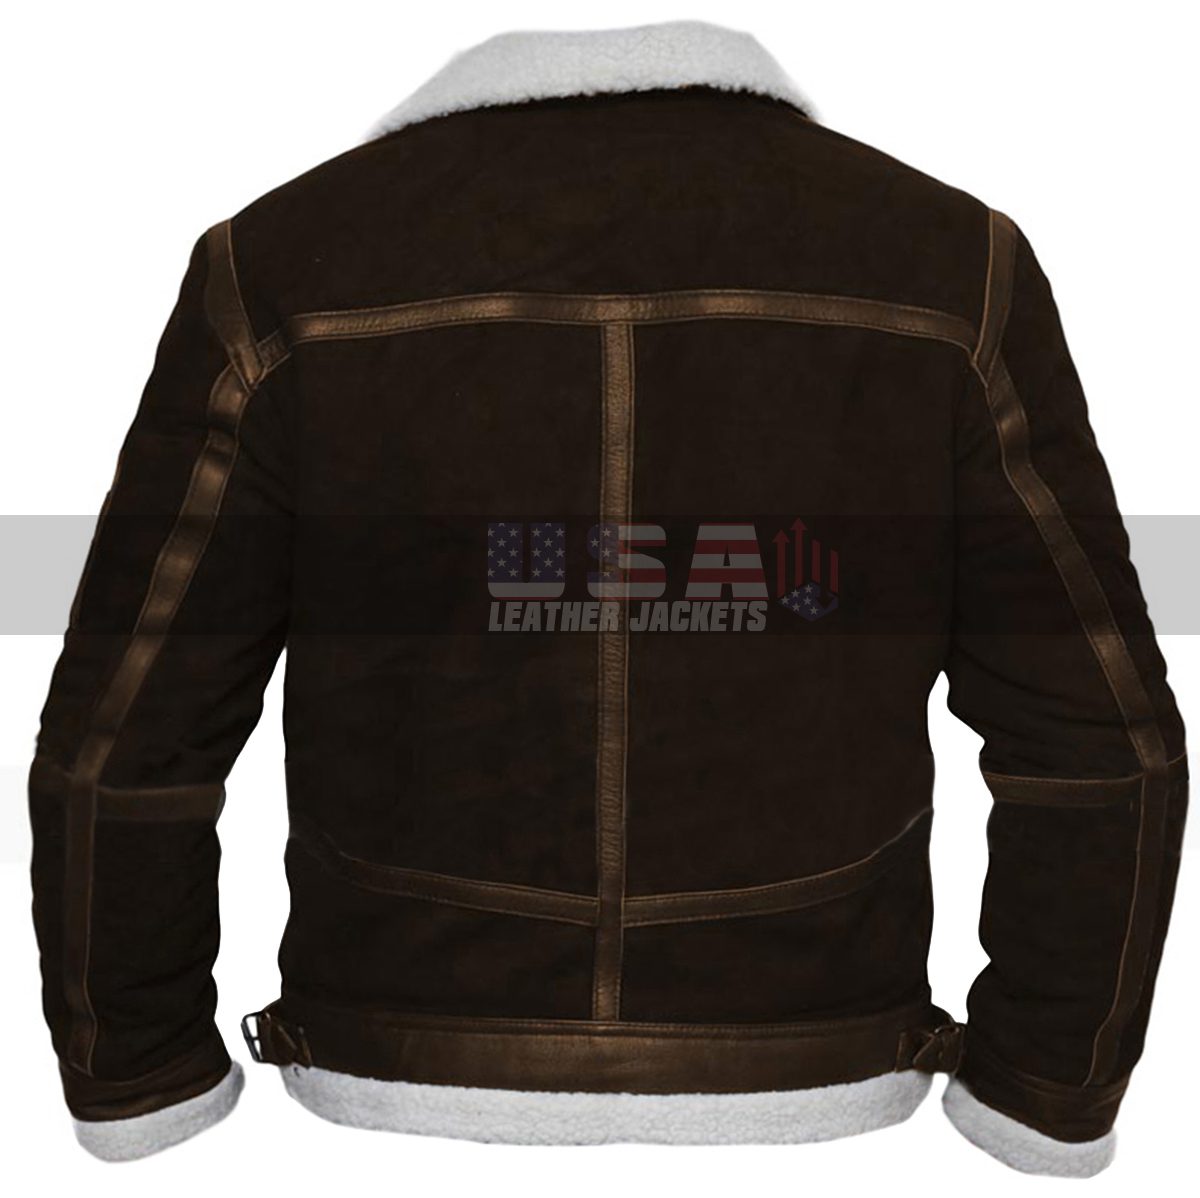 Power 50 Cent (Kanan) White Fur Shearling Brown Leather Jacket